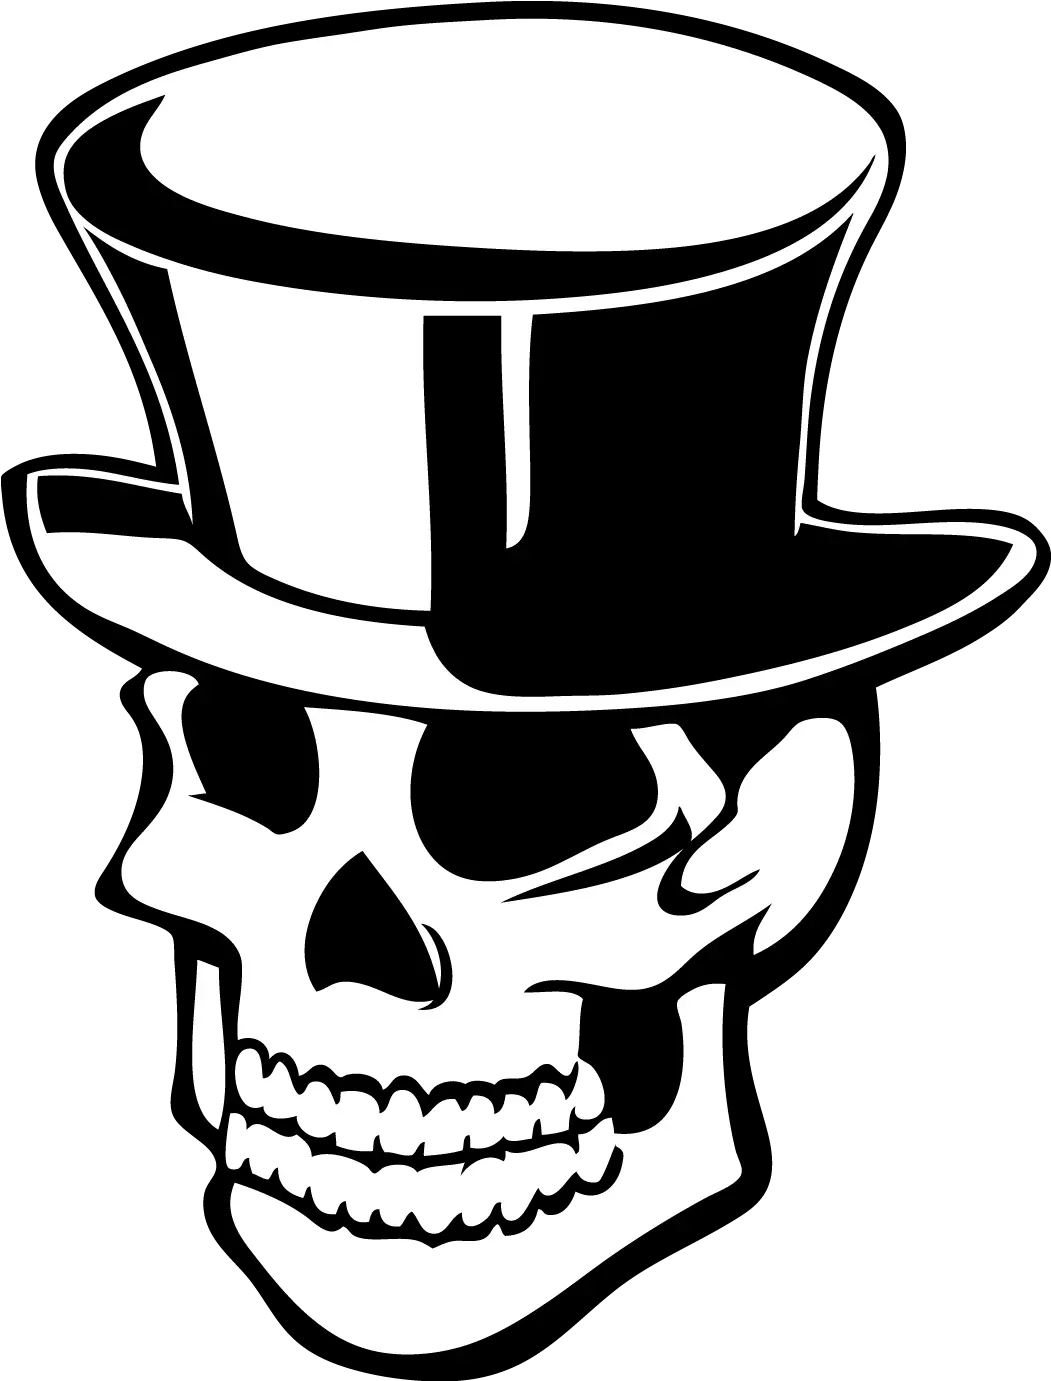 Tophat Png Top Hat Skull Clipart Tophat Png